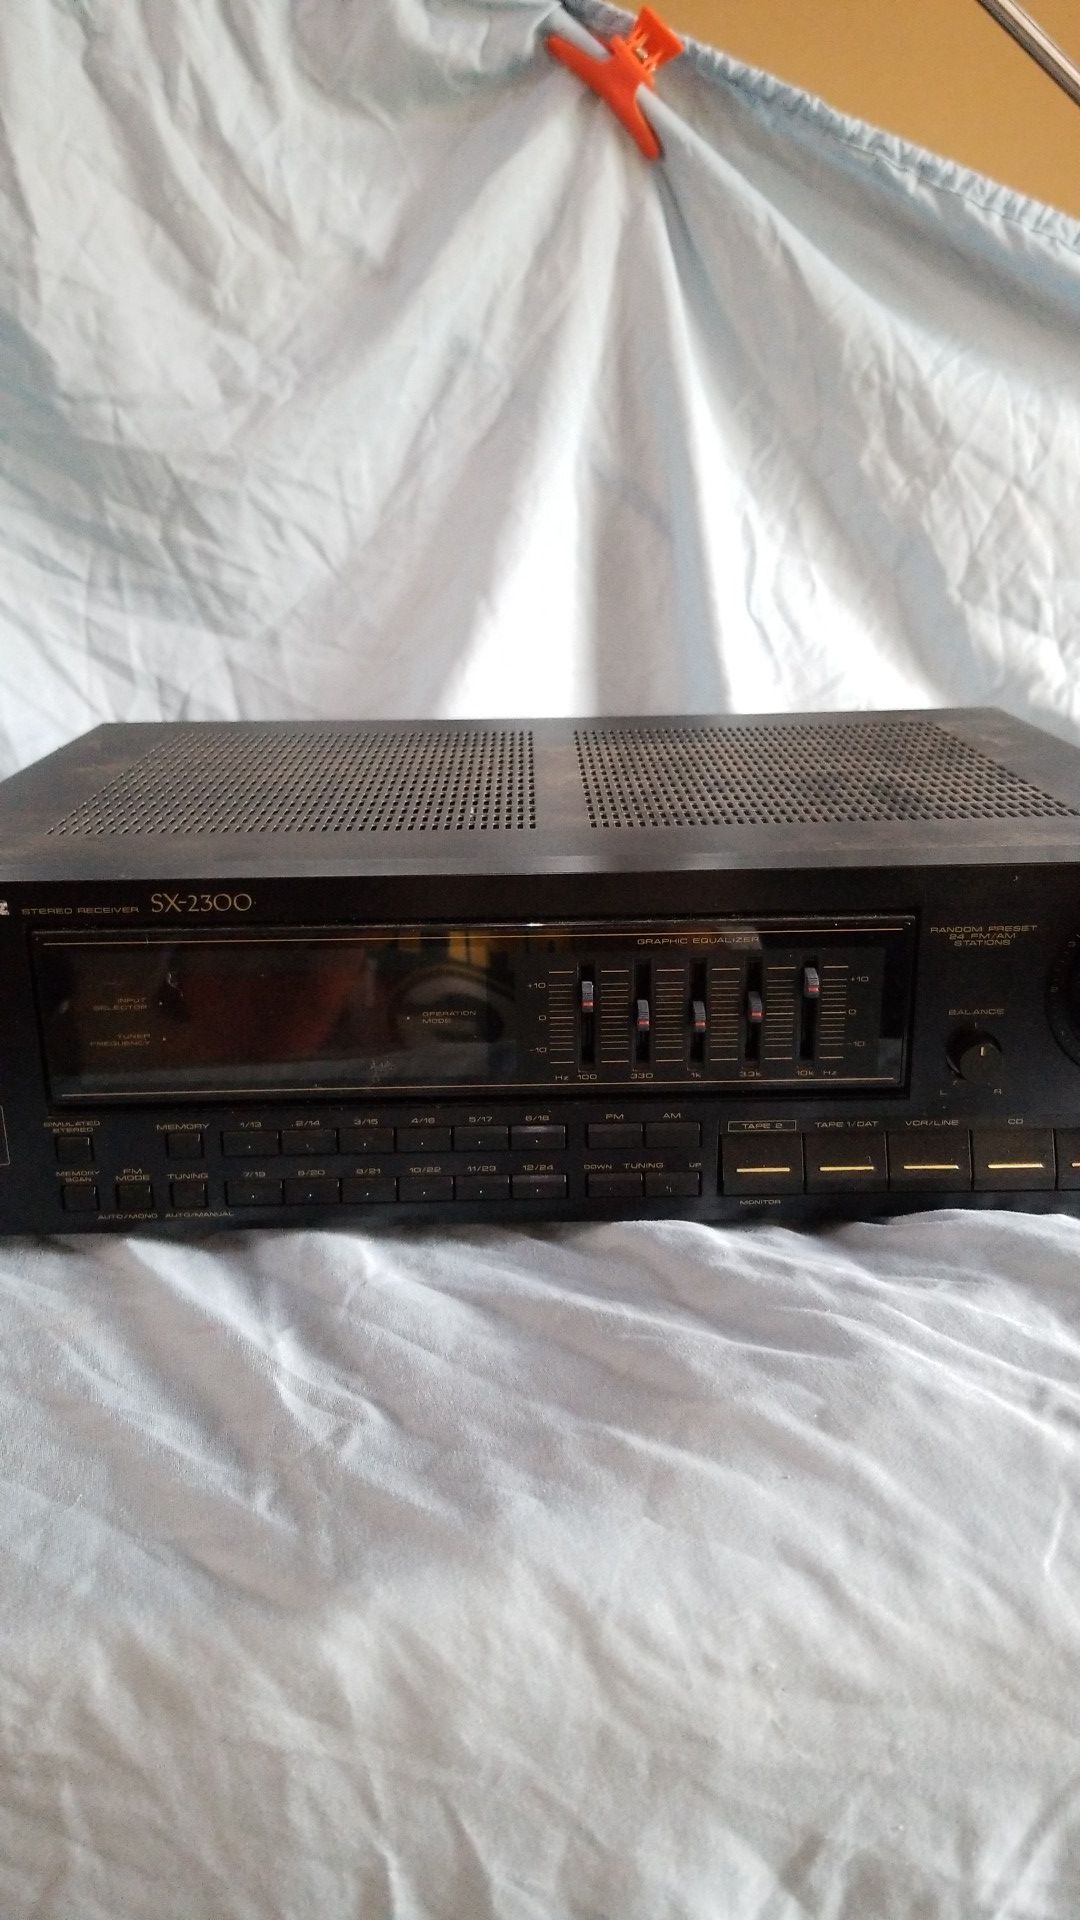 Vintage Pioneer SX-2300 AM/FM Receiver with 5 band graphic equaliser